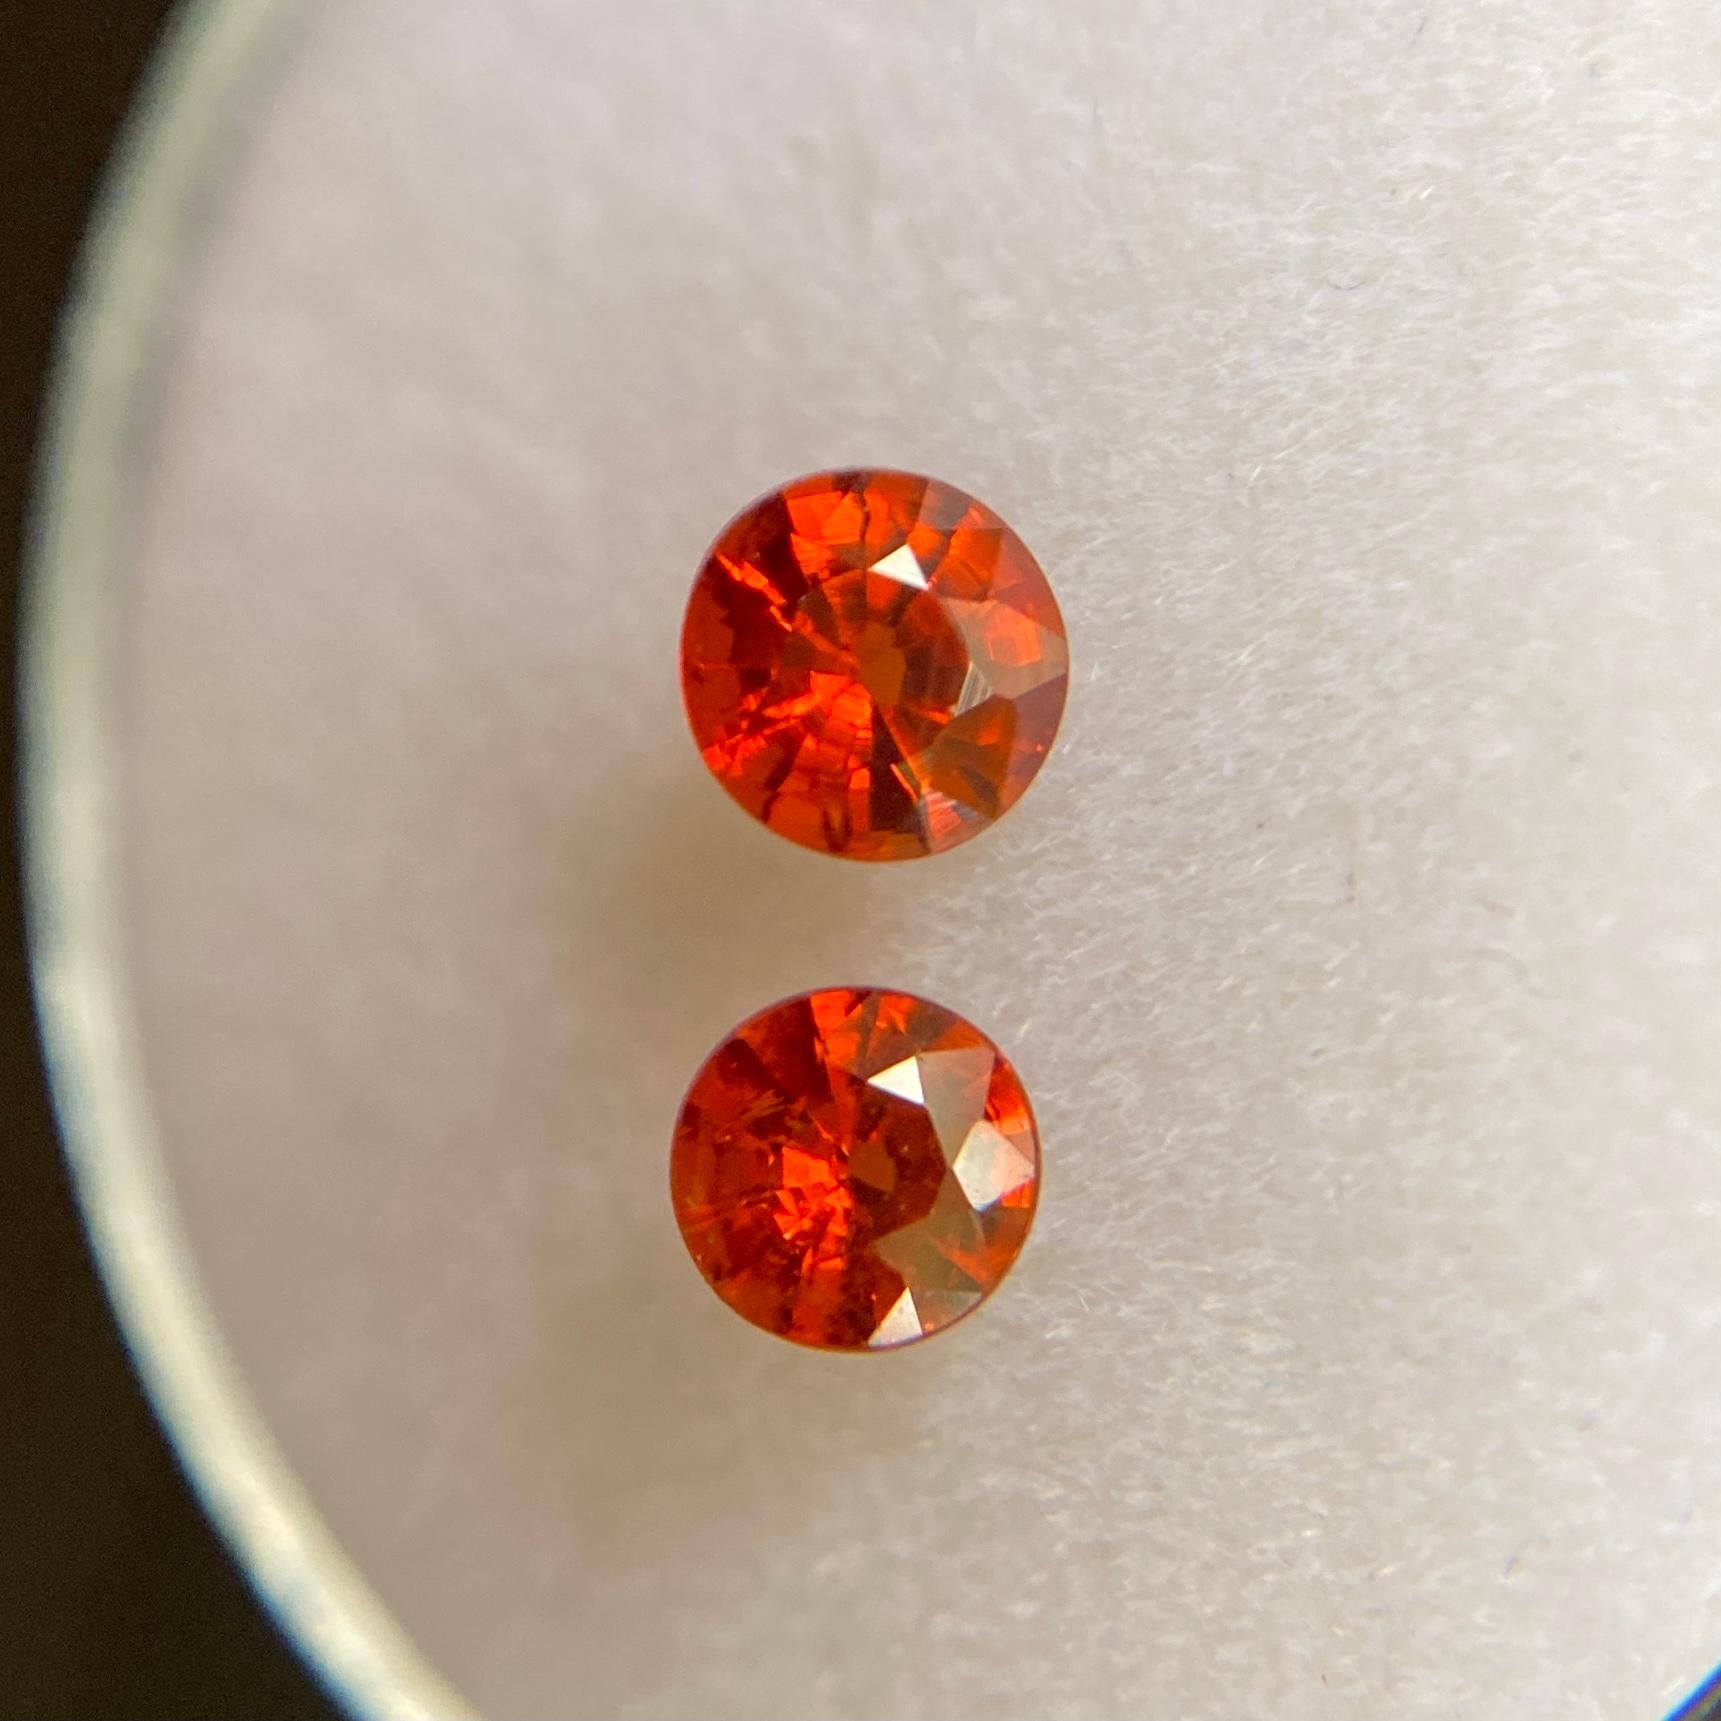 Natural Pair Of Vivid Orange Spessartine Garnets.

Gems approx 0.7-0.8 carat but will vary.

Sizes 4mm with +/- tolerance of approx 0.2mm.

All have an an excellent round brilliant cut and very good to excellent clarity. All with excellent polish to